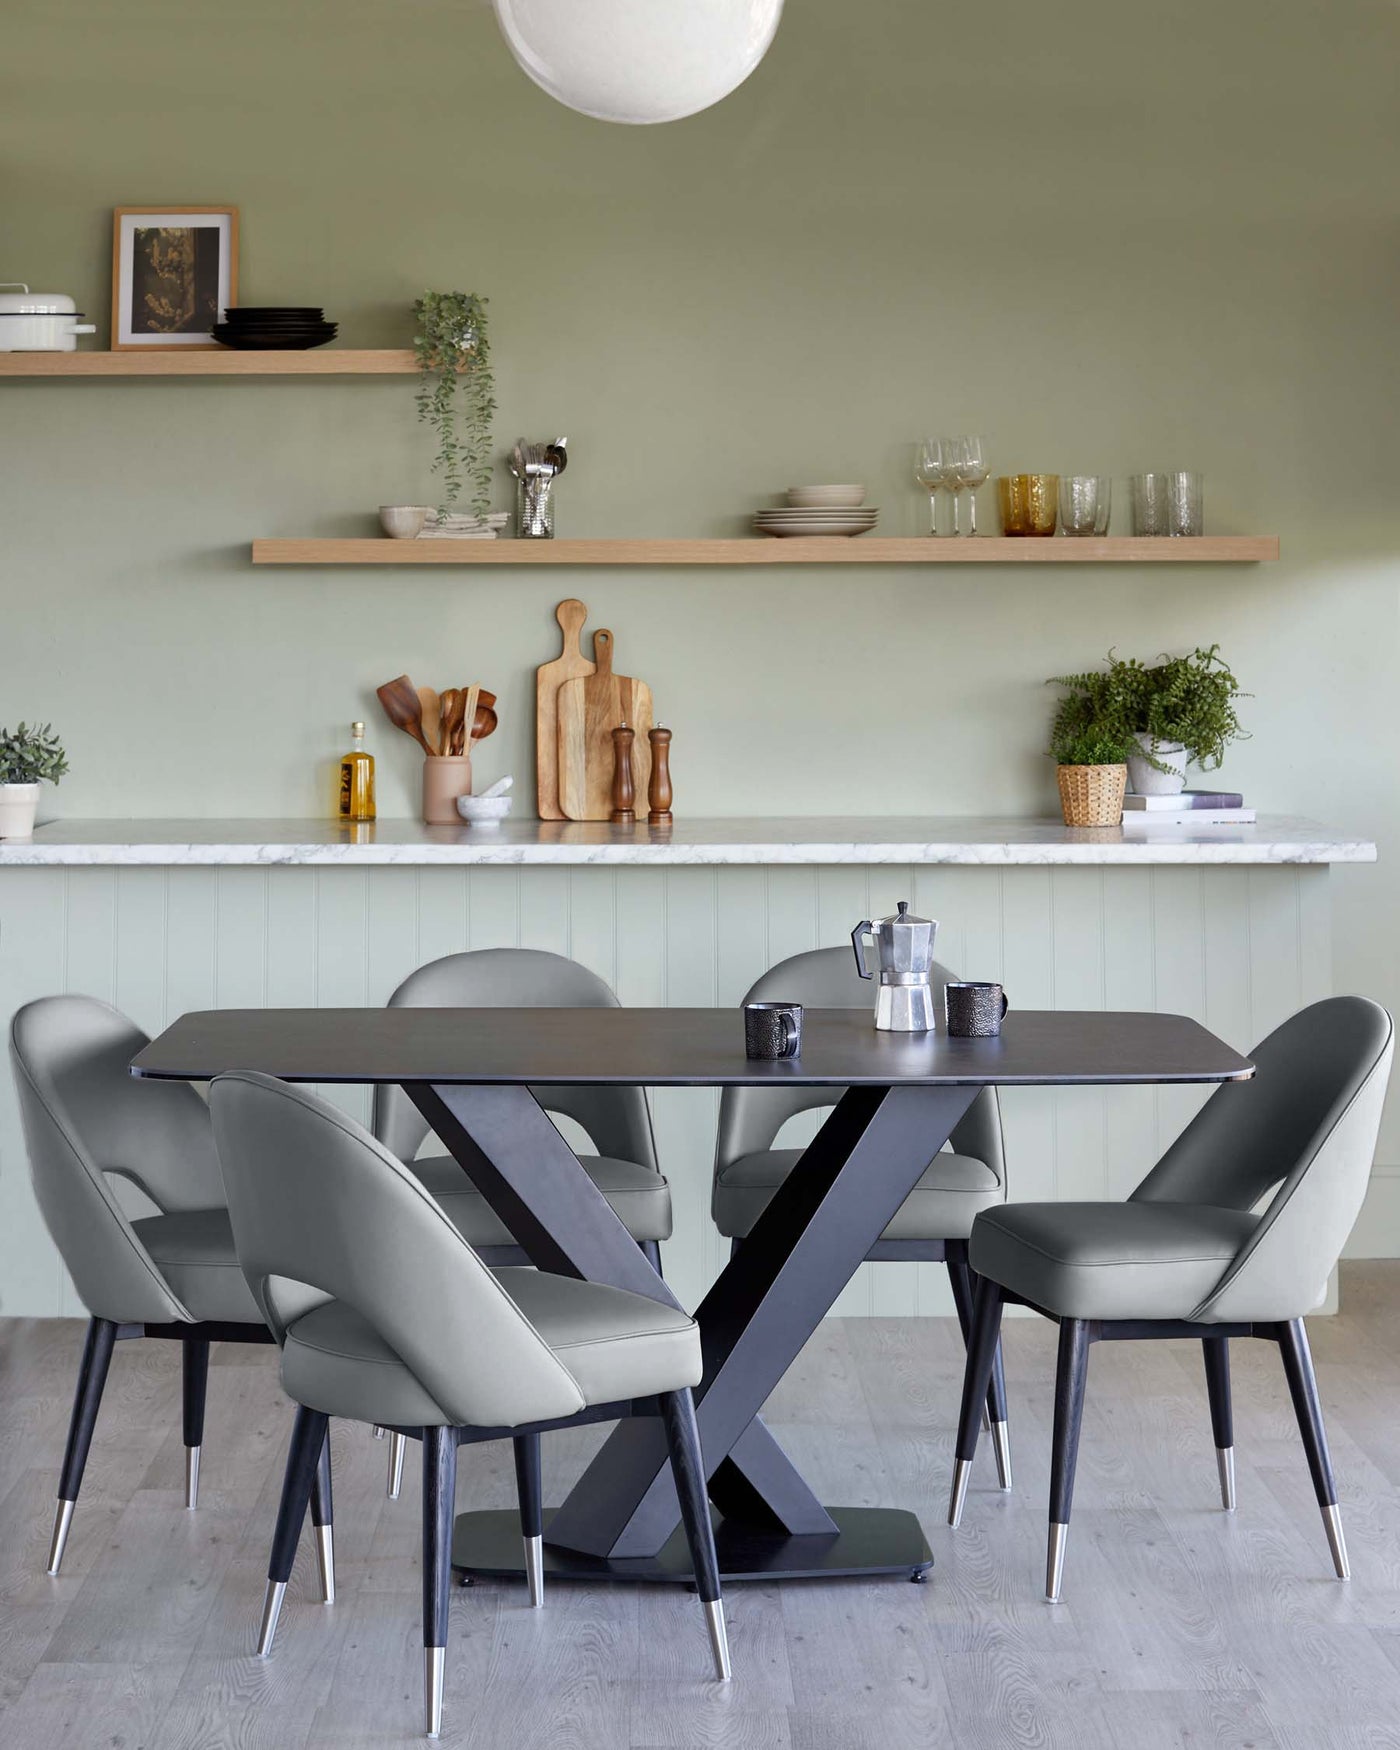 Modern dining furniture with a rectangular black table featuring a unique X-shaped base. Surrounding the table are six sleek, grey upholstered chairs with black legs tipped with metallic accents. The clean lines and contemporary design create an elegant and sophisticated dining set-up.